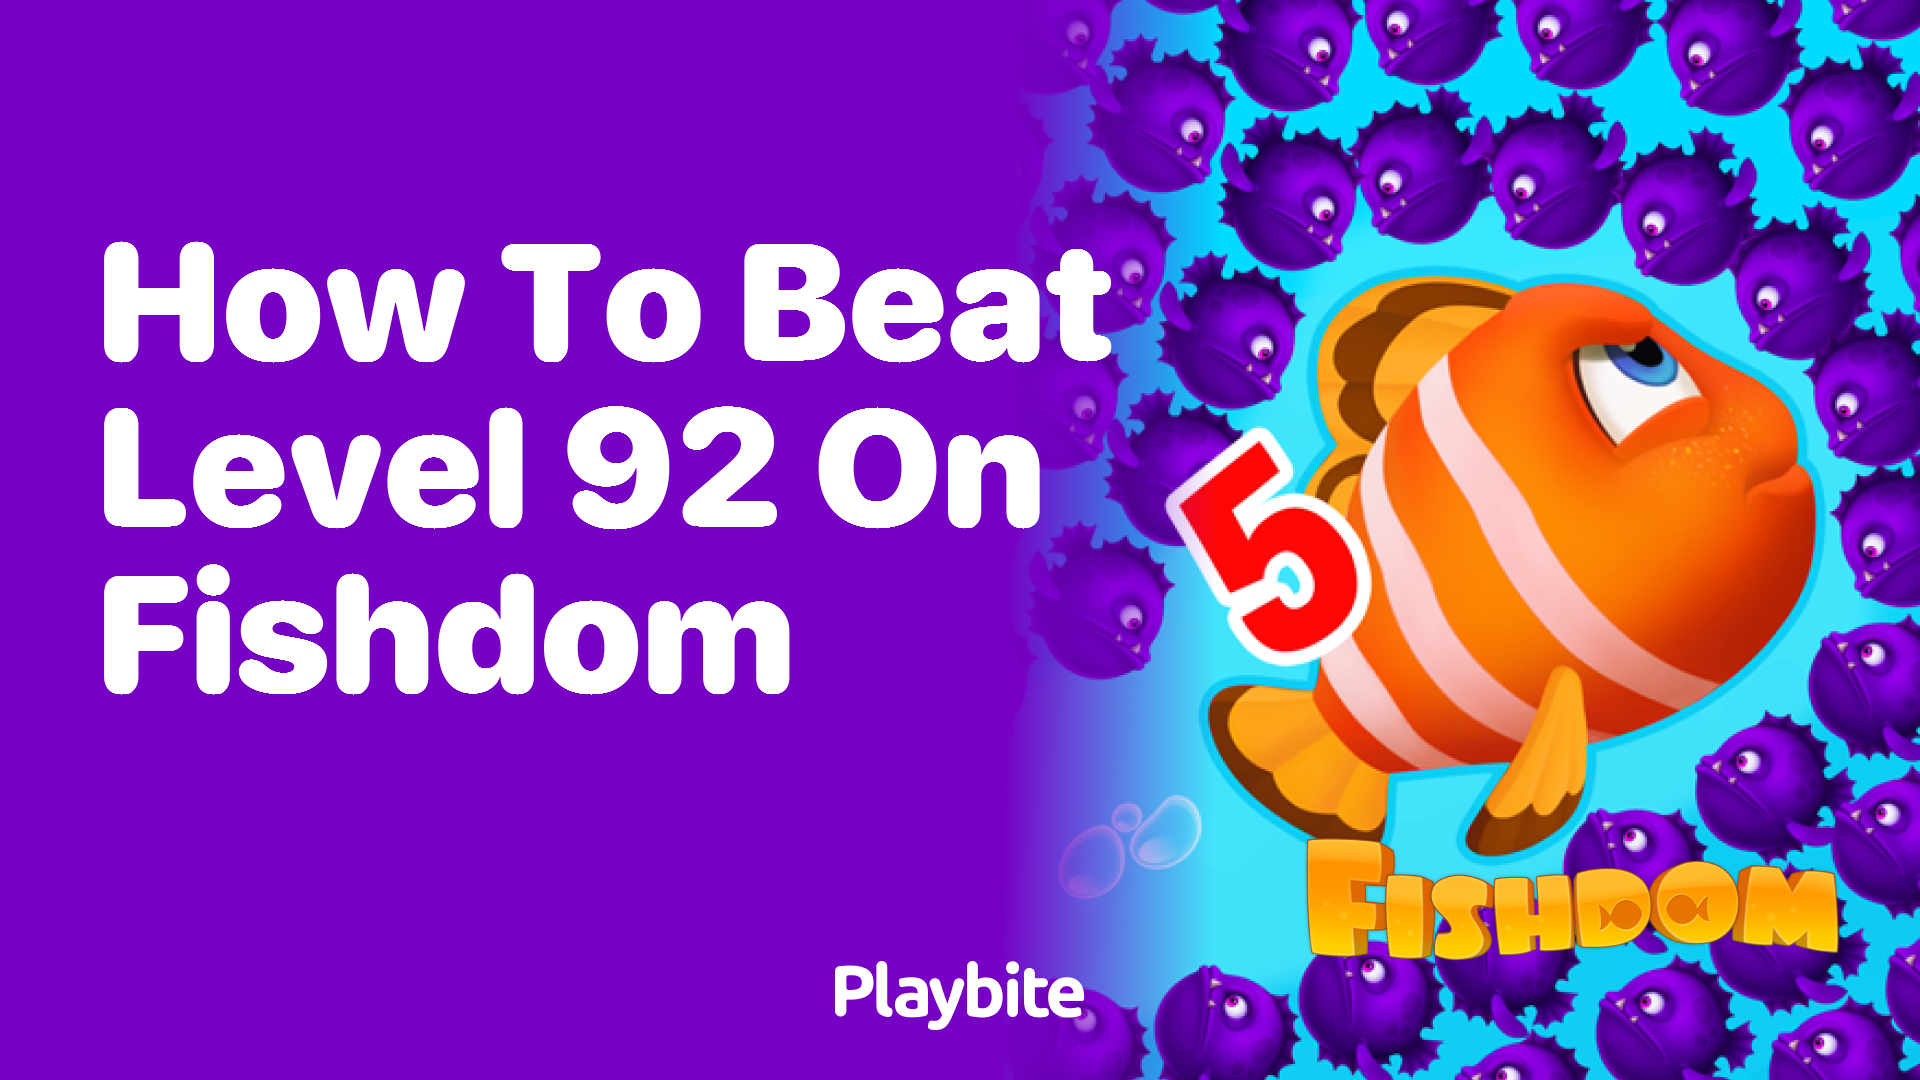 How to Beat Level 92 on Fishdom: A Quick Guide